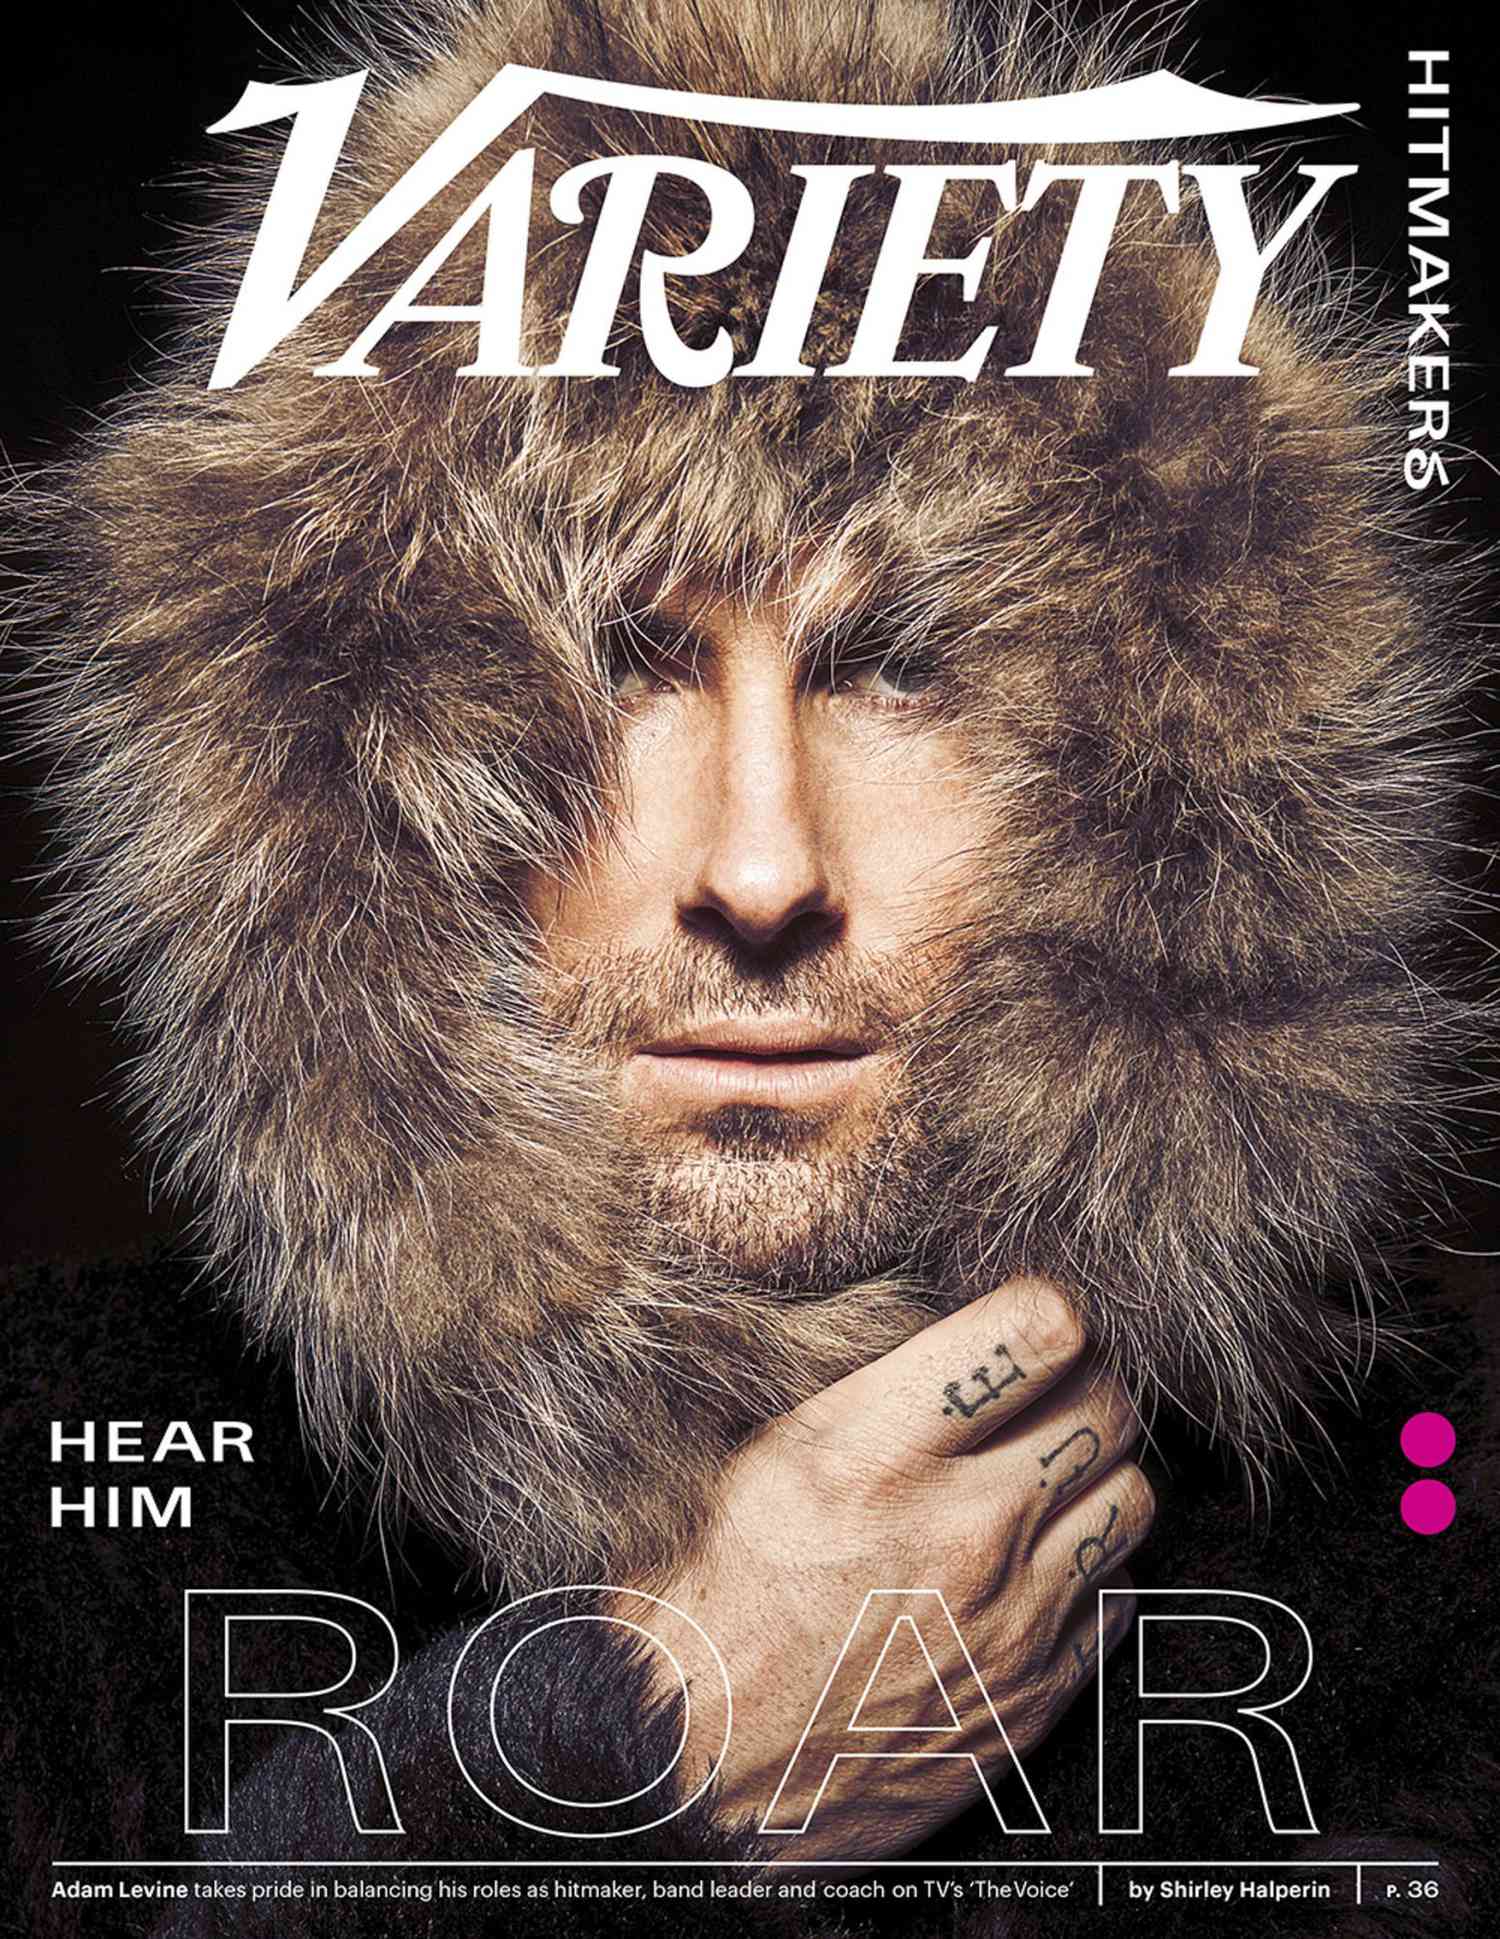 variety-hitmakers-adam-levine-cover-forweb